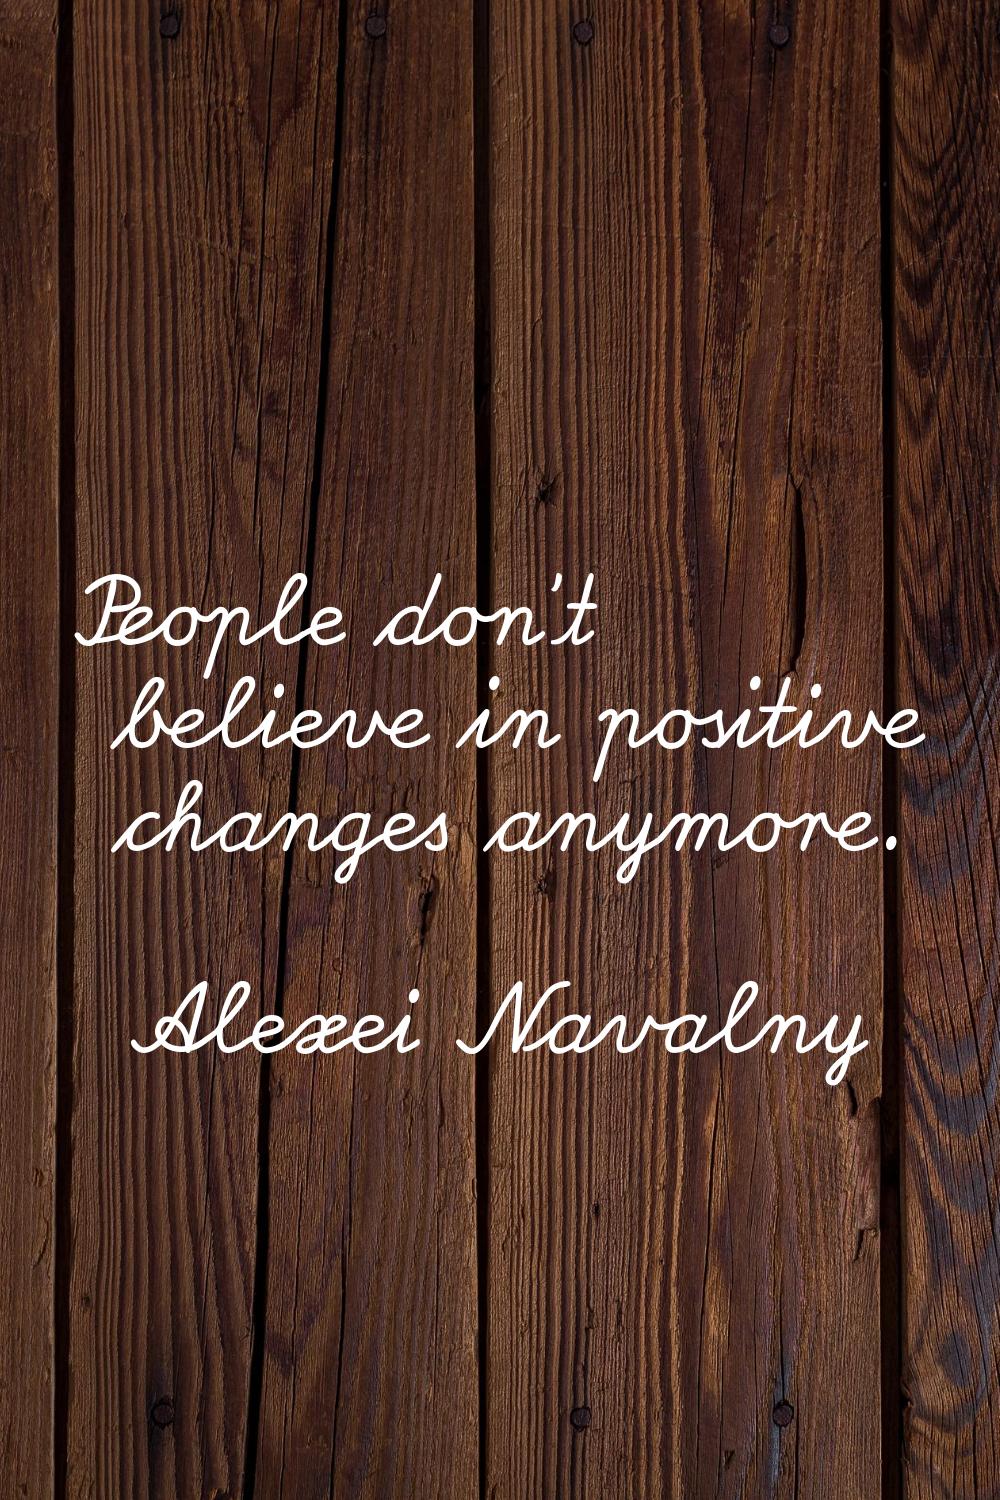 People don't believe in positive changes anymore.